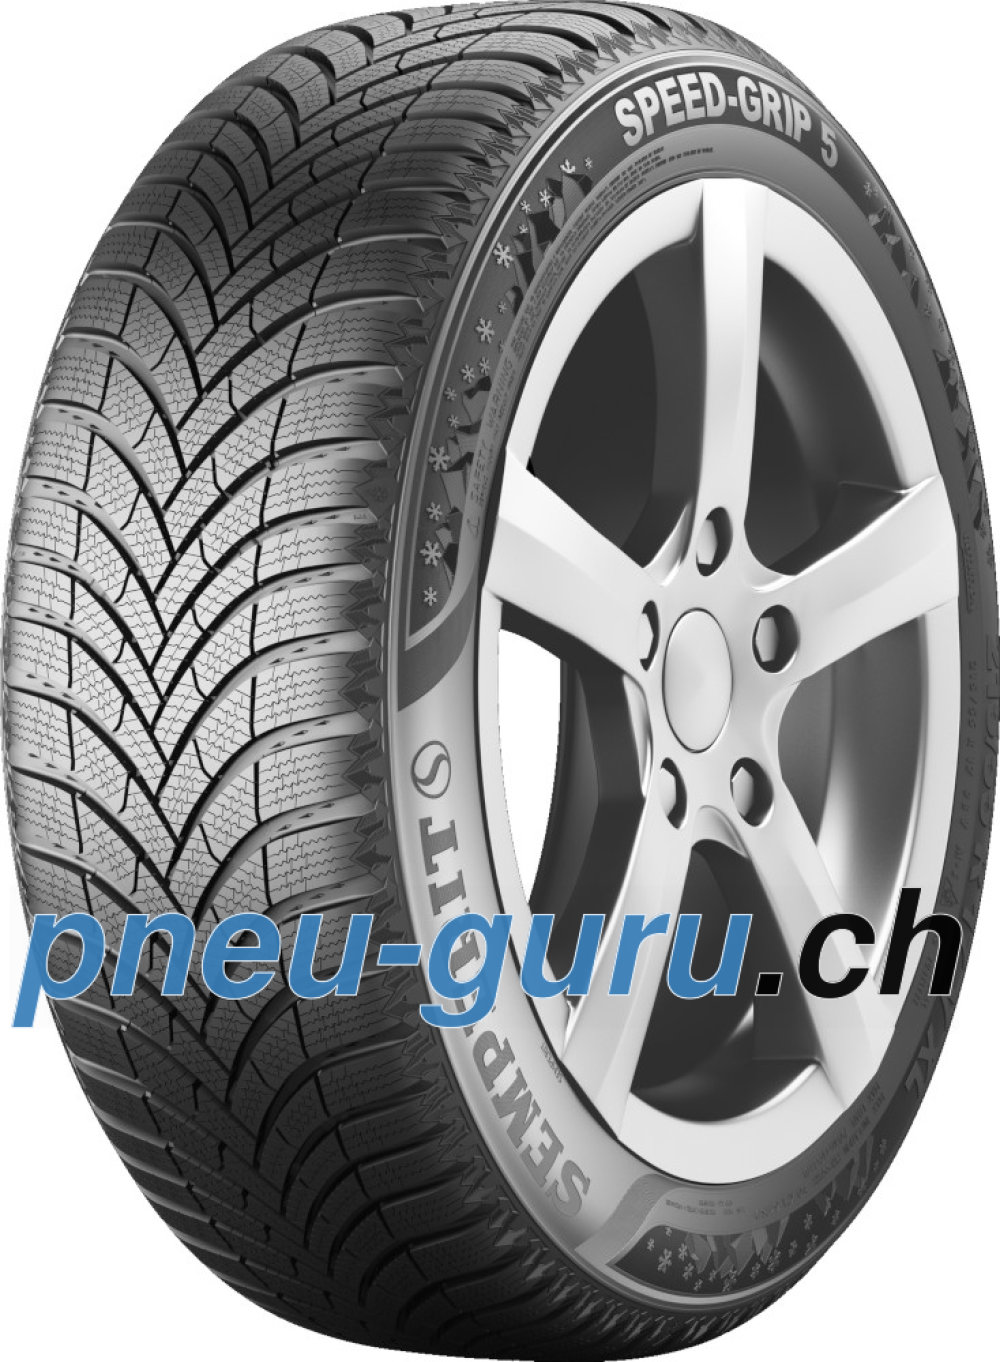 Chaines neige 9mm ECO 55 - 185 65 R14, 165 65 R15, 175 60 R15